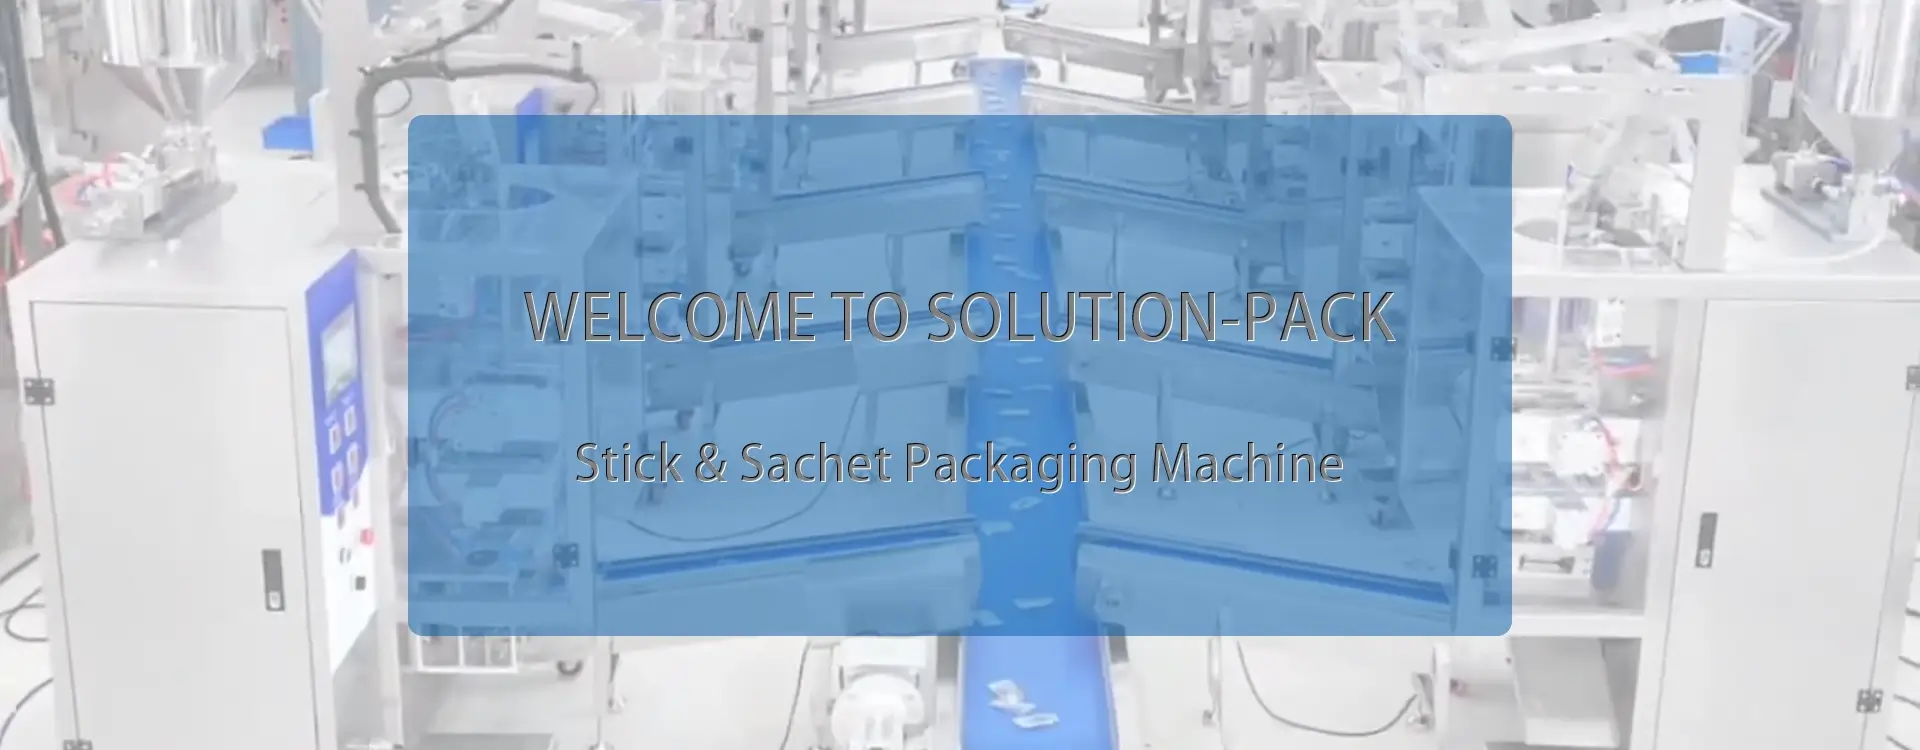 Model FB-100 Automatic Powder Sachet Packaging Machine Unit Bottom Banner Picture | Solution-Pack